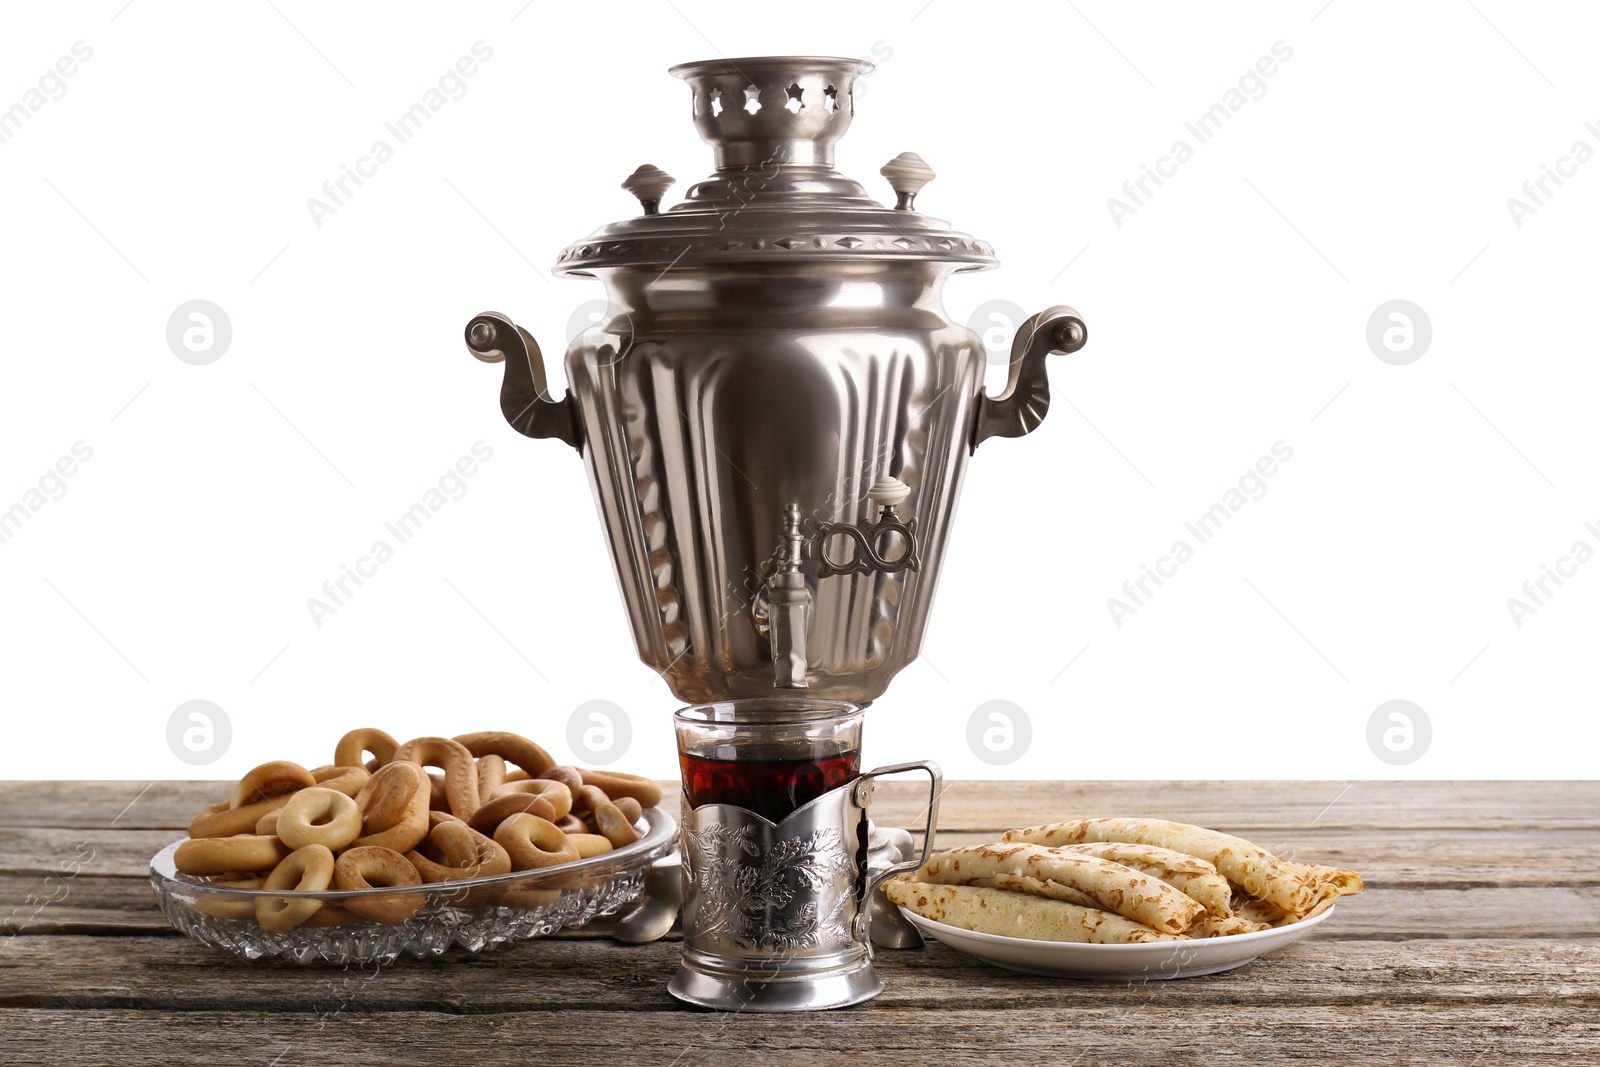 Photo of Vintage samovar, cup of hot drink and snacks on wooden table against white background. Traditional Russian tea ceremony